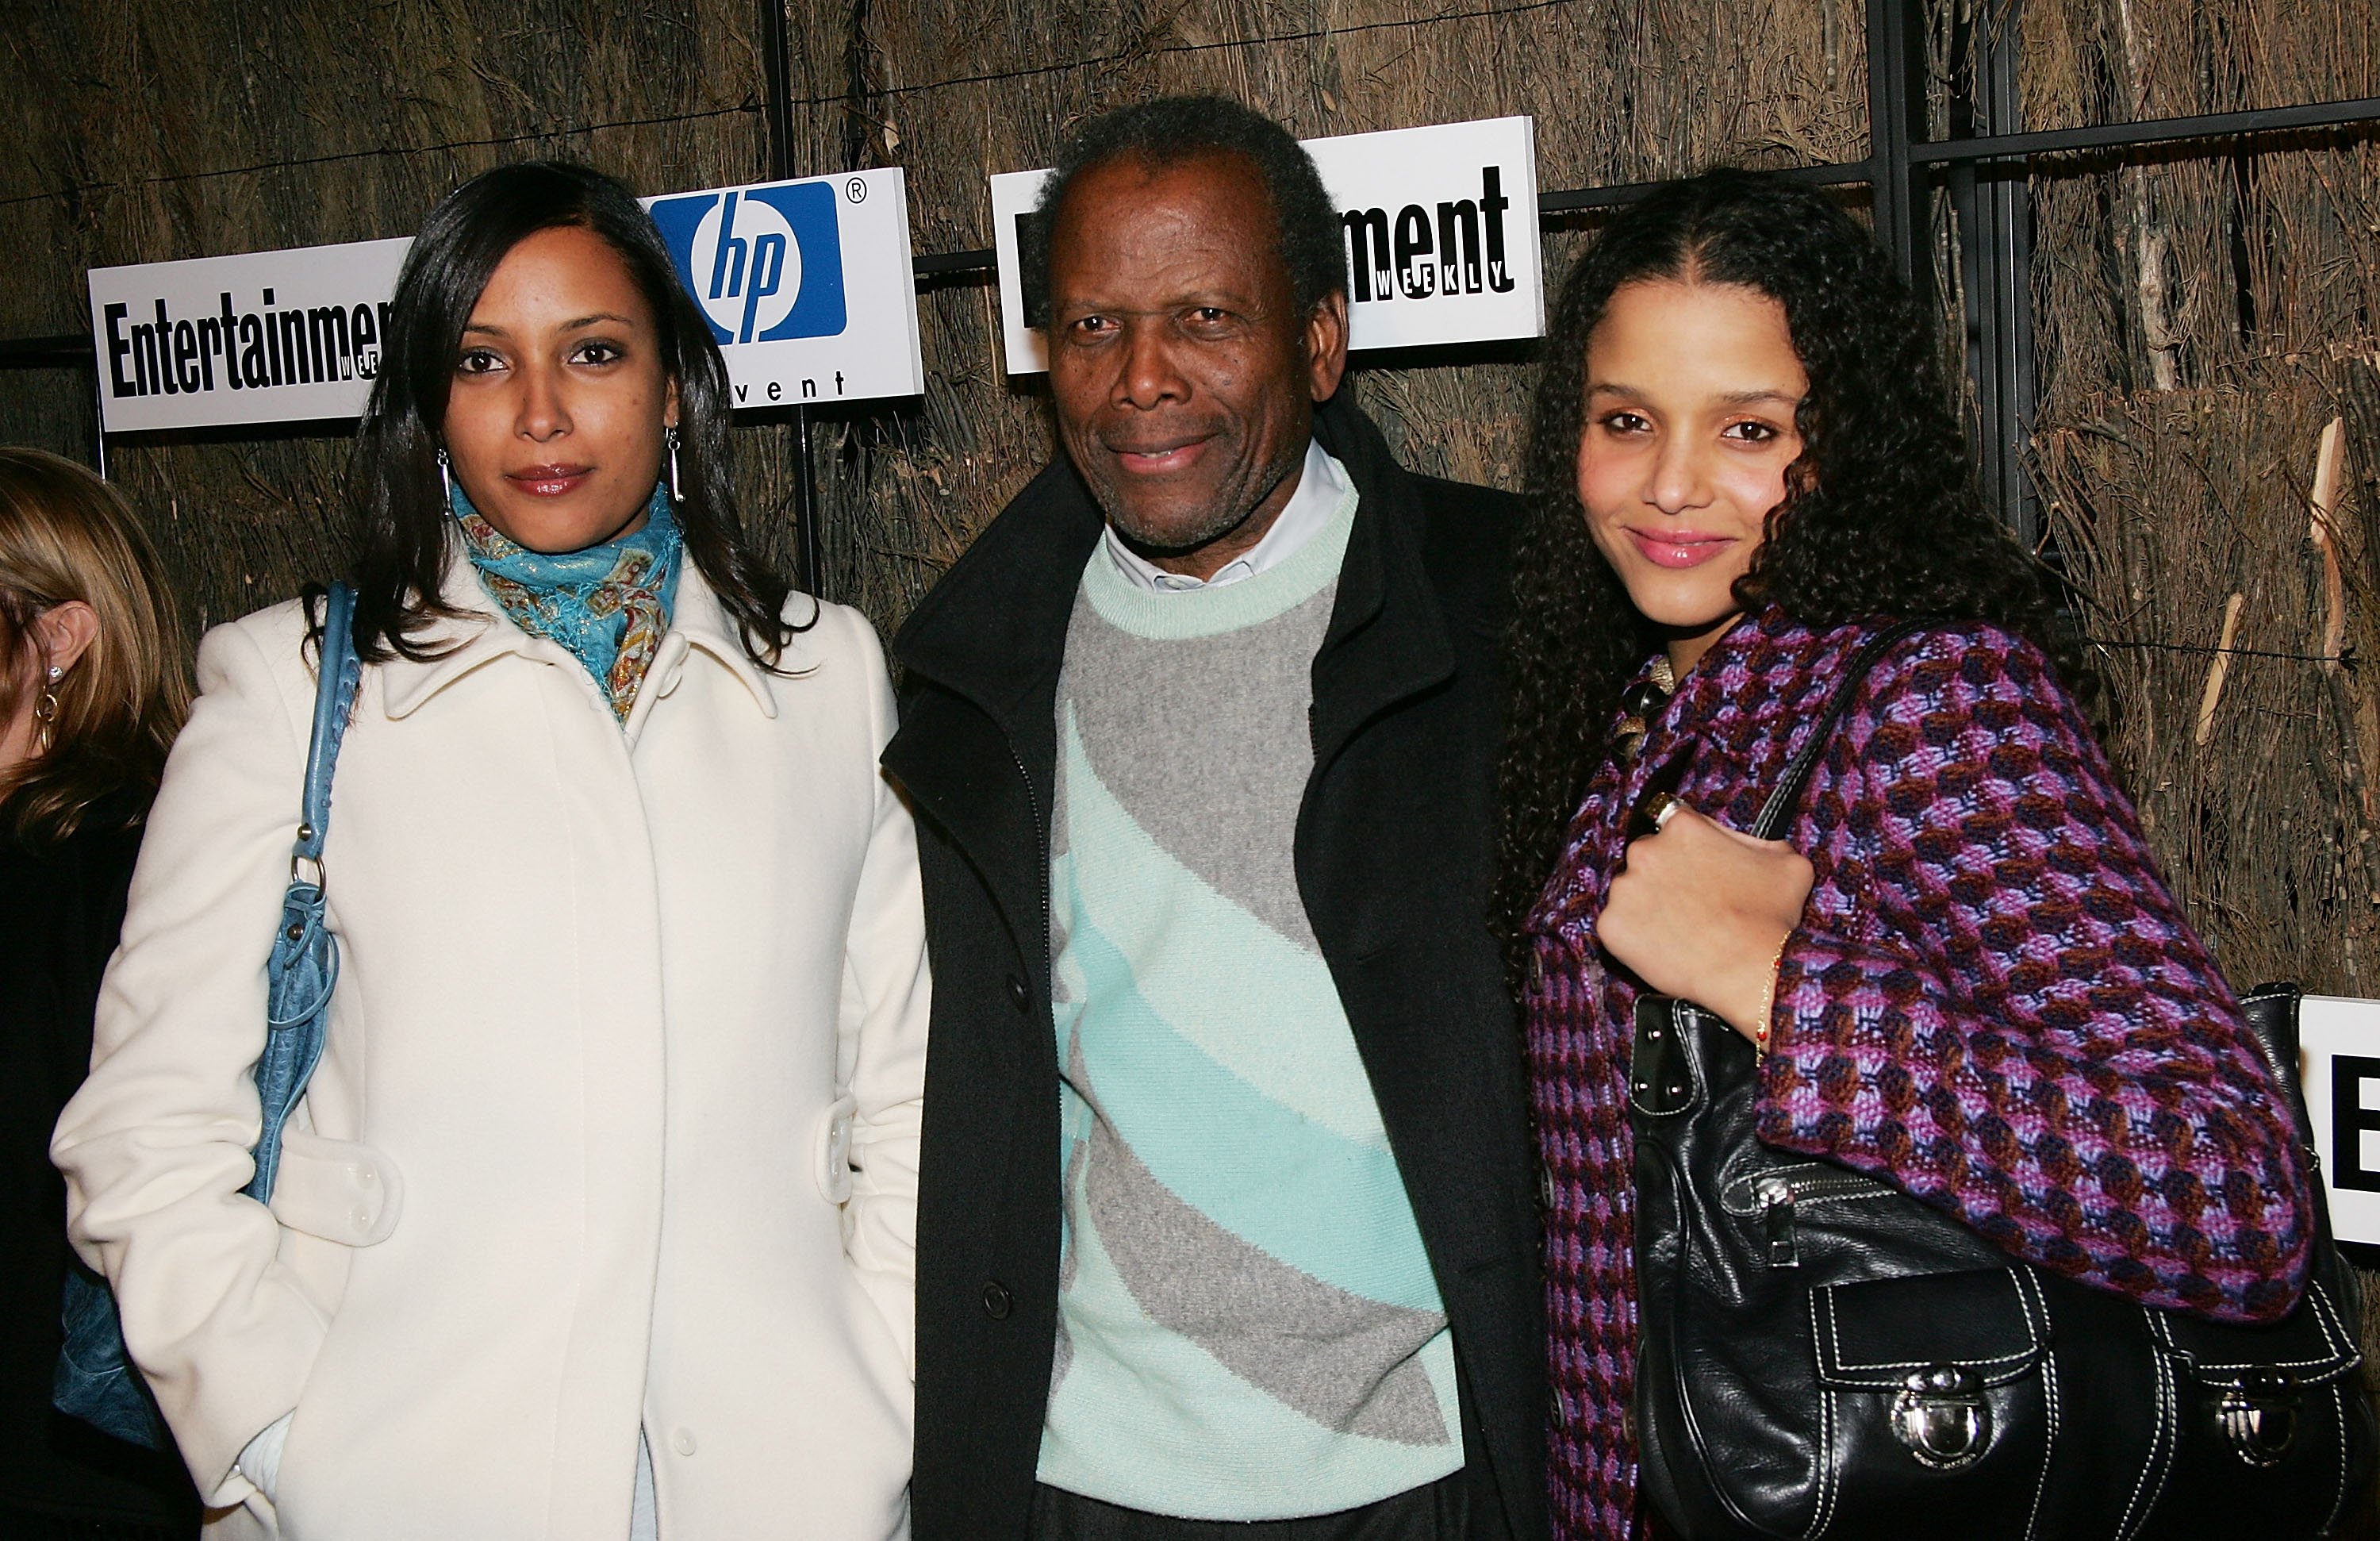  Sidney Poitier and daughters attend Entertainment Weekly's Winter Wonderland Sundance Bash during the 2005 Sundance Film Festival, Park City, Utah. | Photo: Getty Images